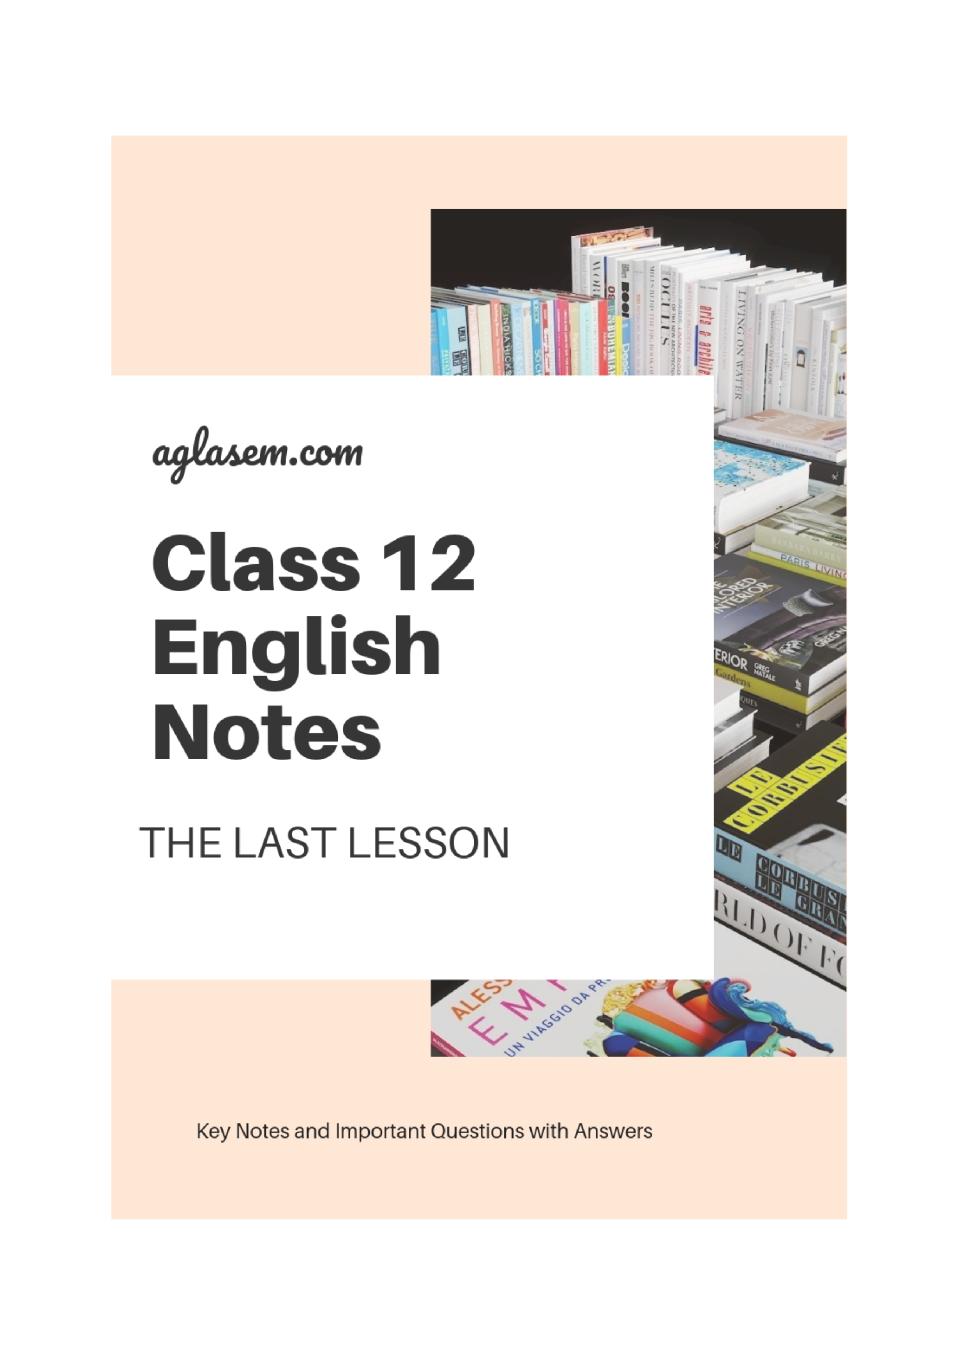 Class 12 English Flamingo Notes For The Last Lesson - Page 1